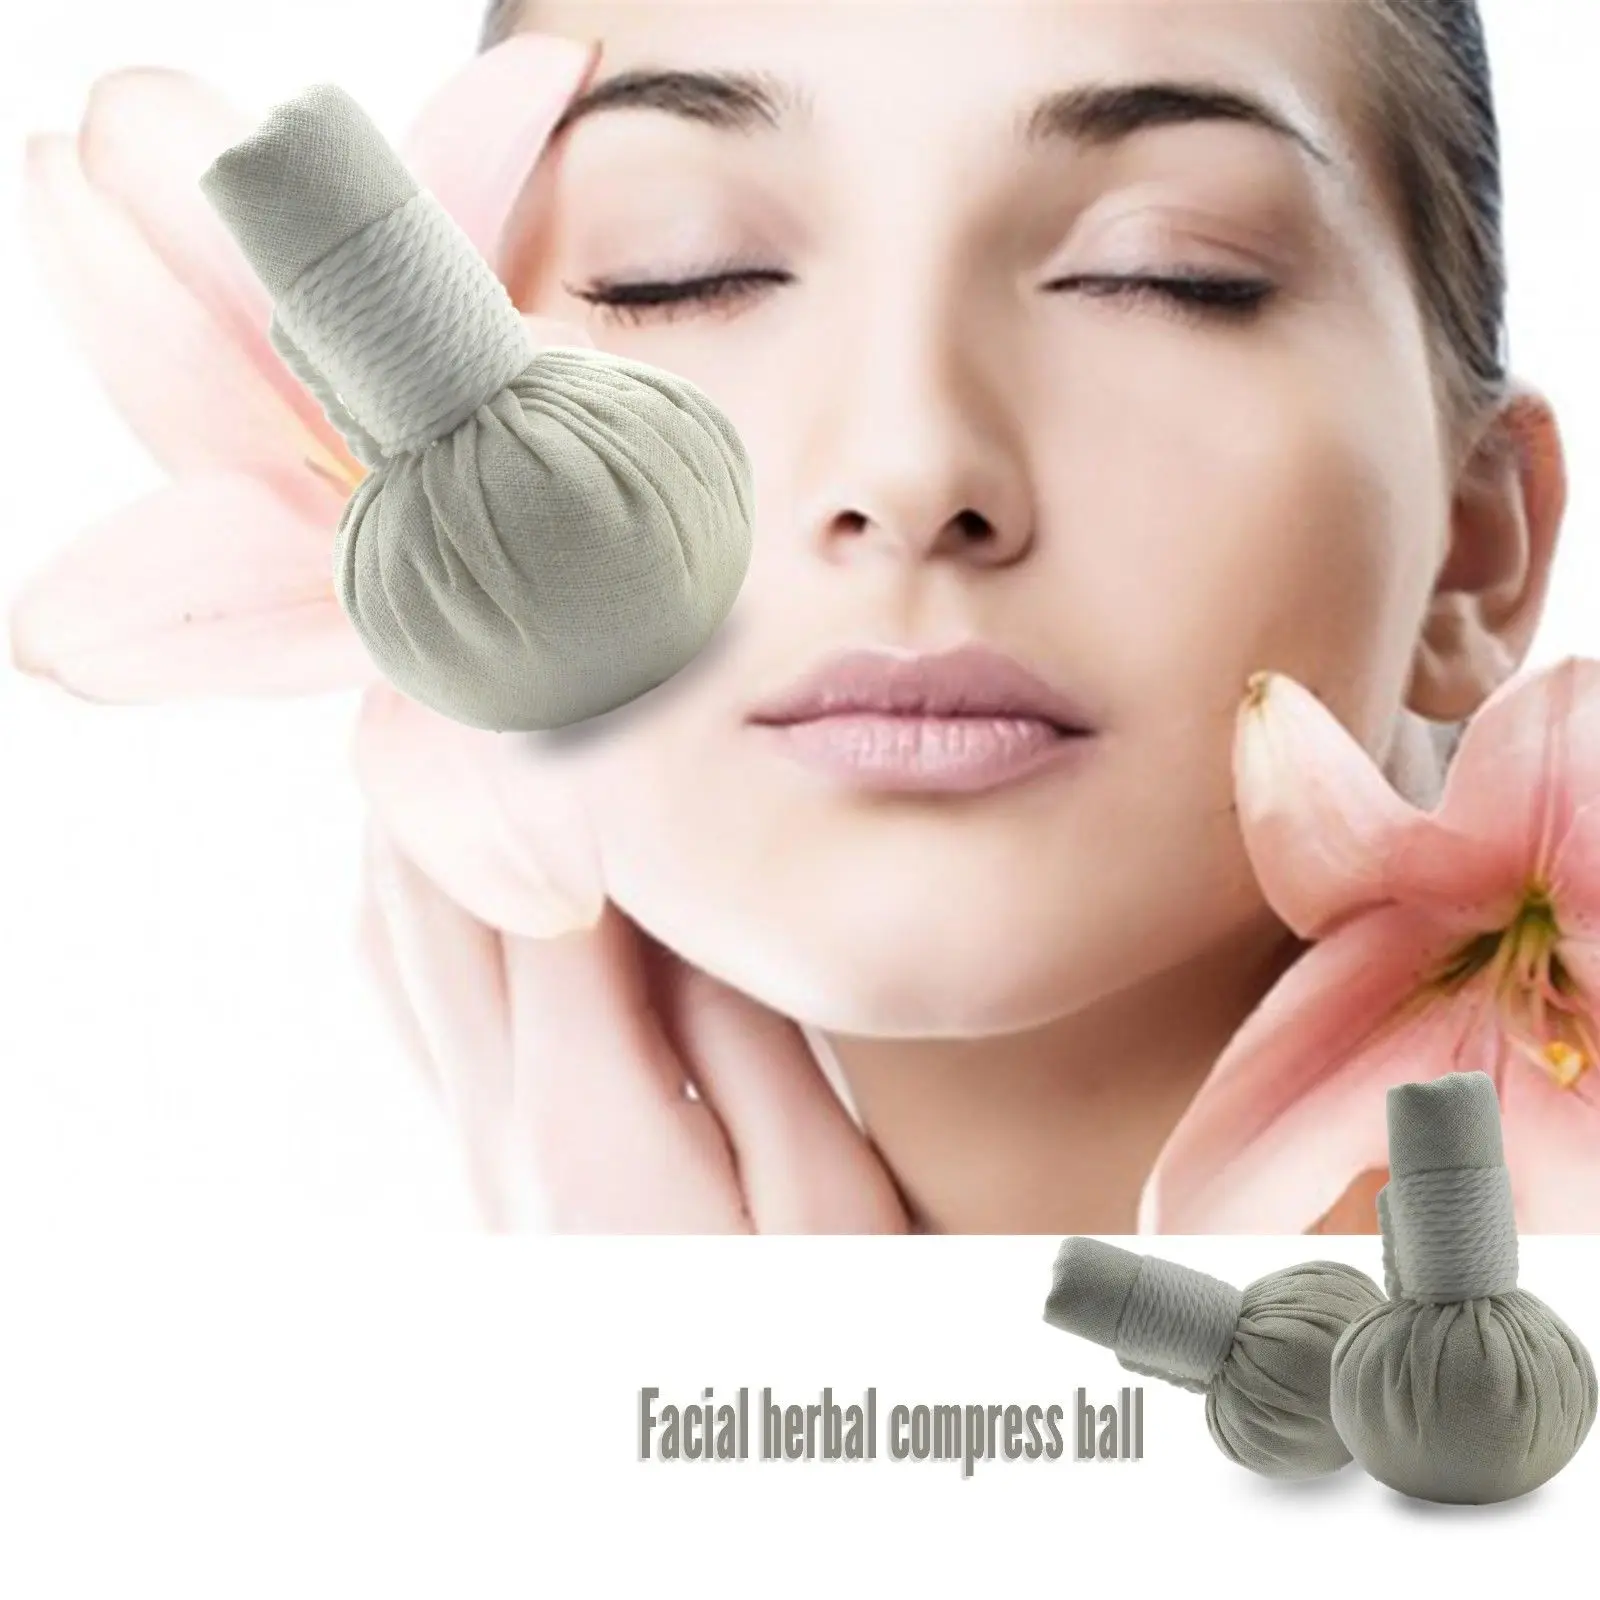 

70G.THAI HERBAL MASSAGE COMPRESS BALL FOR FACE & BODY RELAXING SPA AROMA FREE SHIPPING